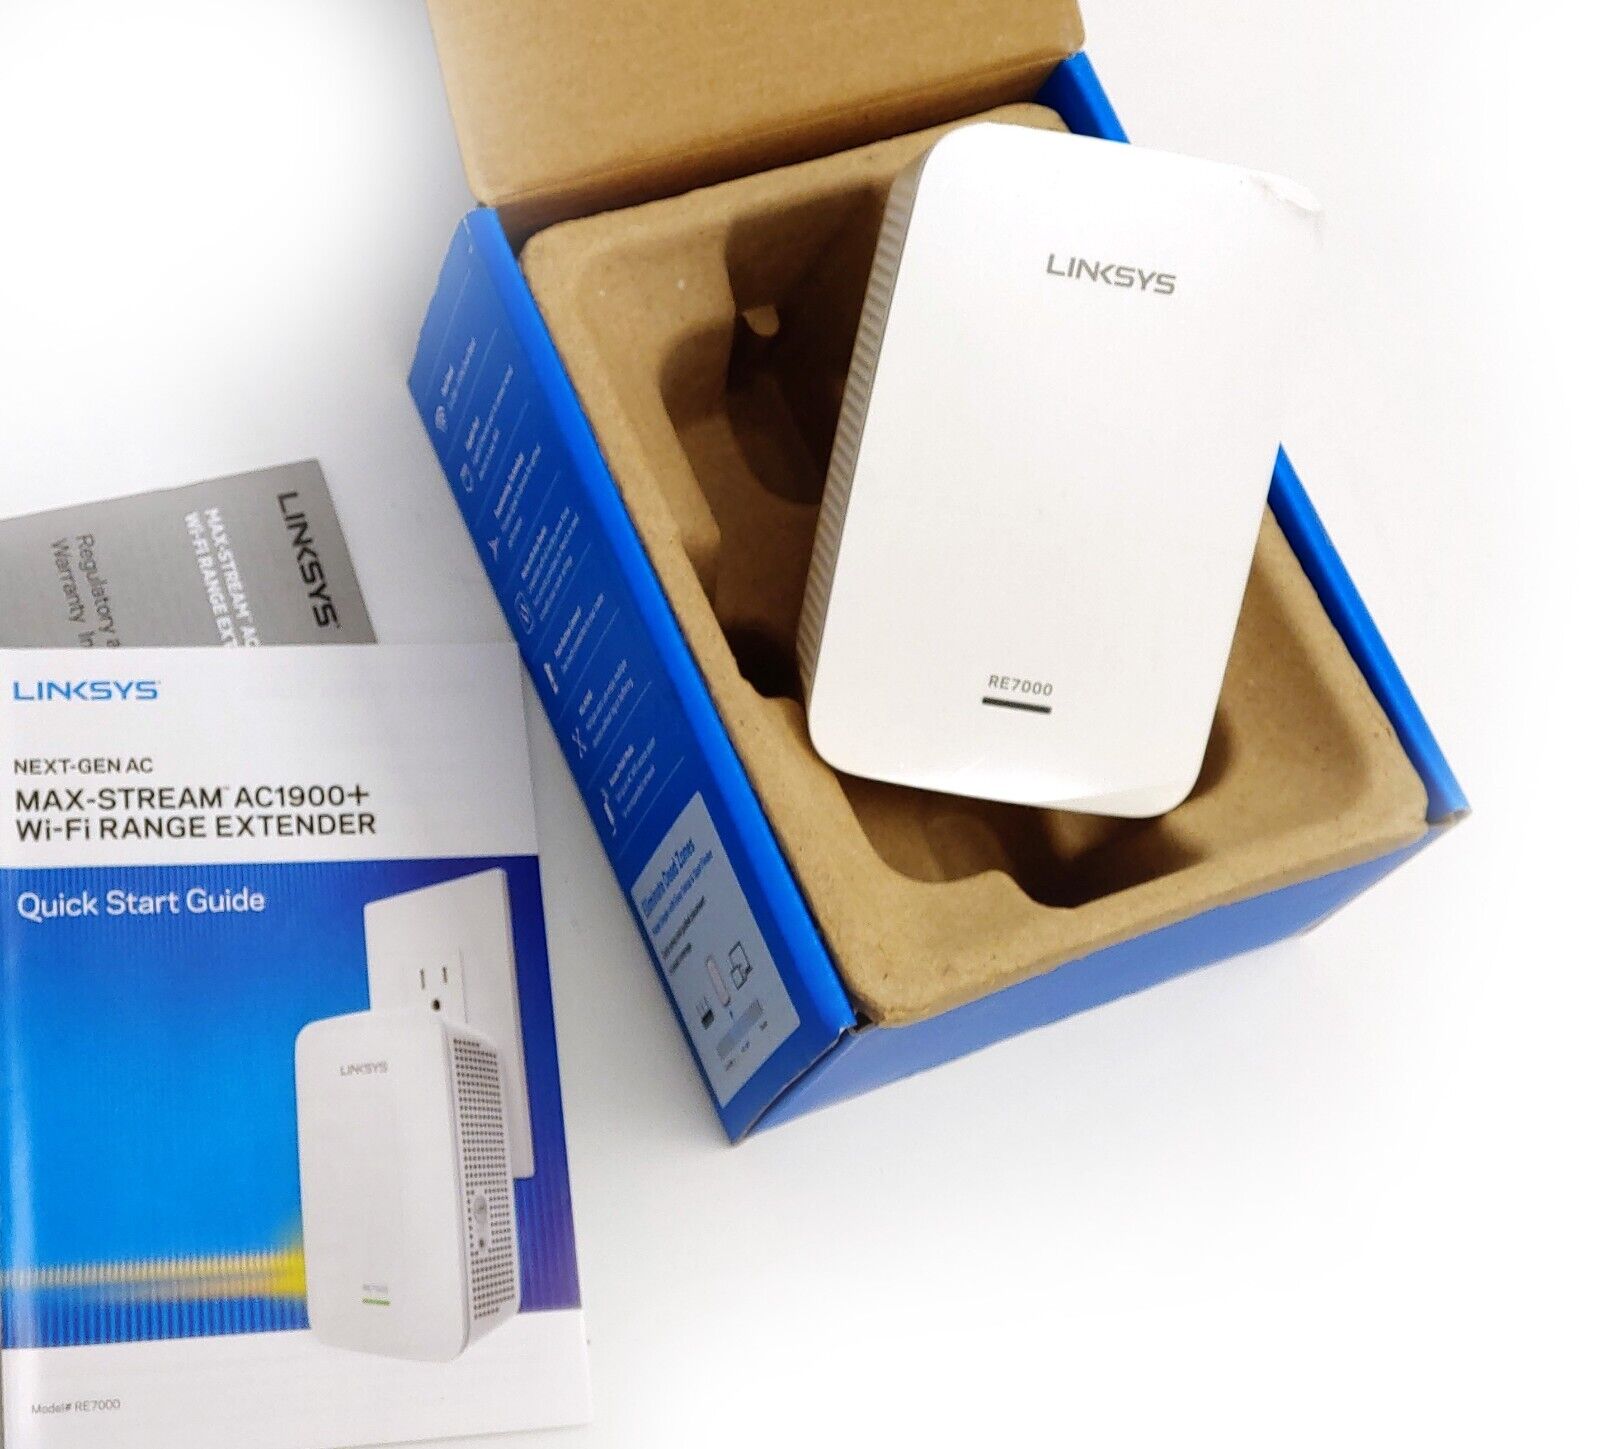 Linksys RE7000 V2 AC1900+ Max-Stream Dual-Band Wi-Fi Range Extender Booster